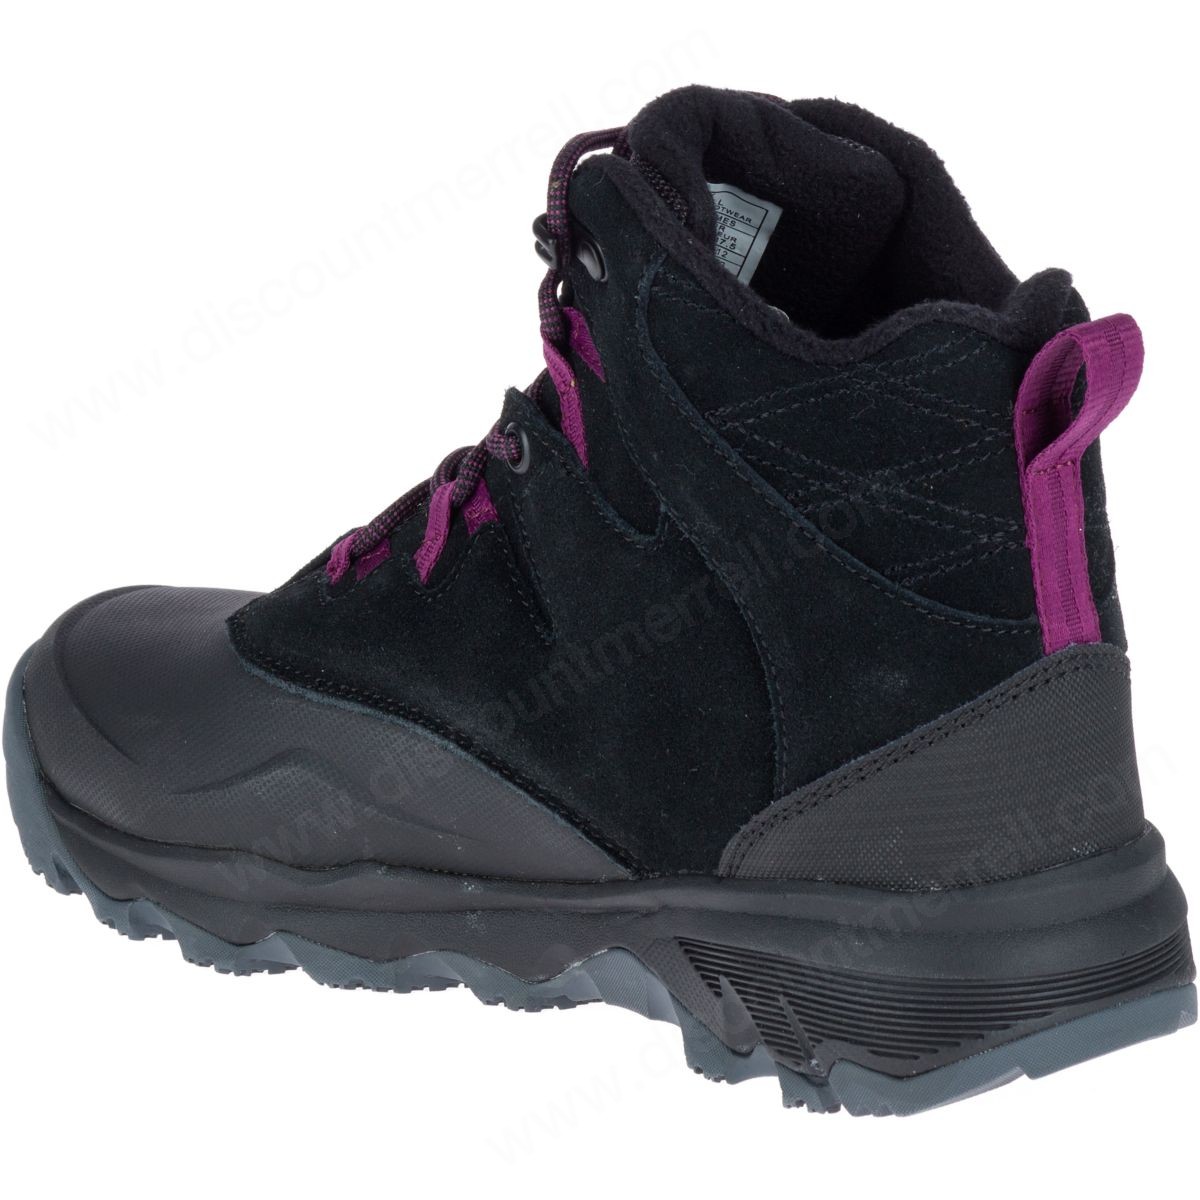 Merrell Lady's Thermo Shiver " Waterproof Black - -6